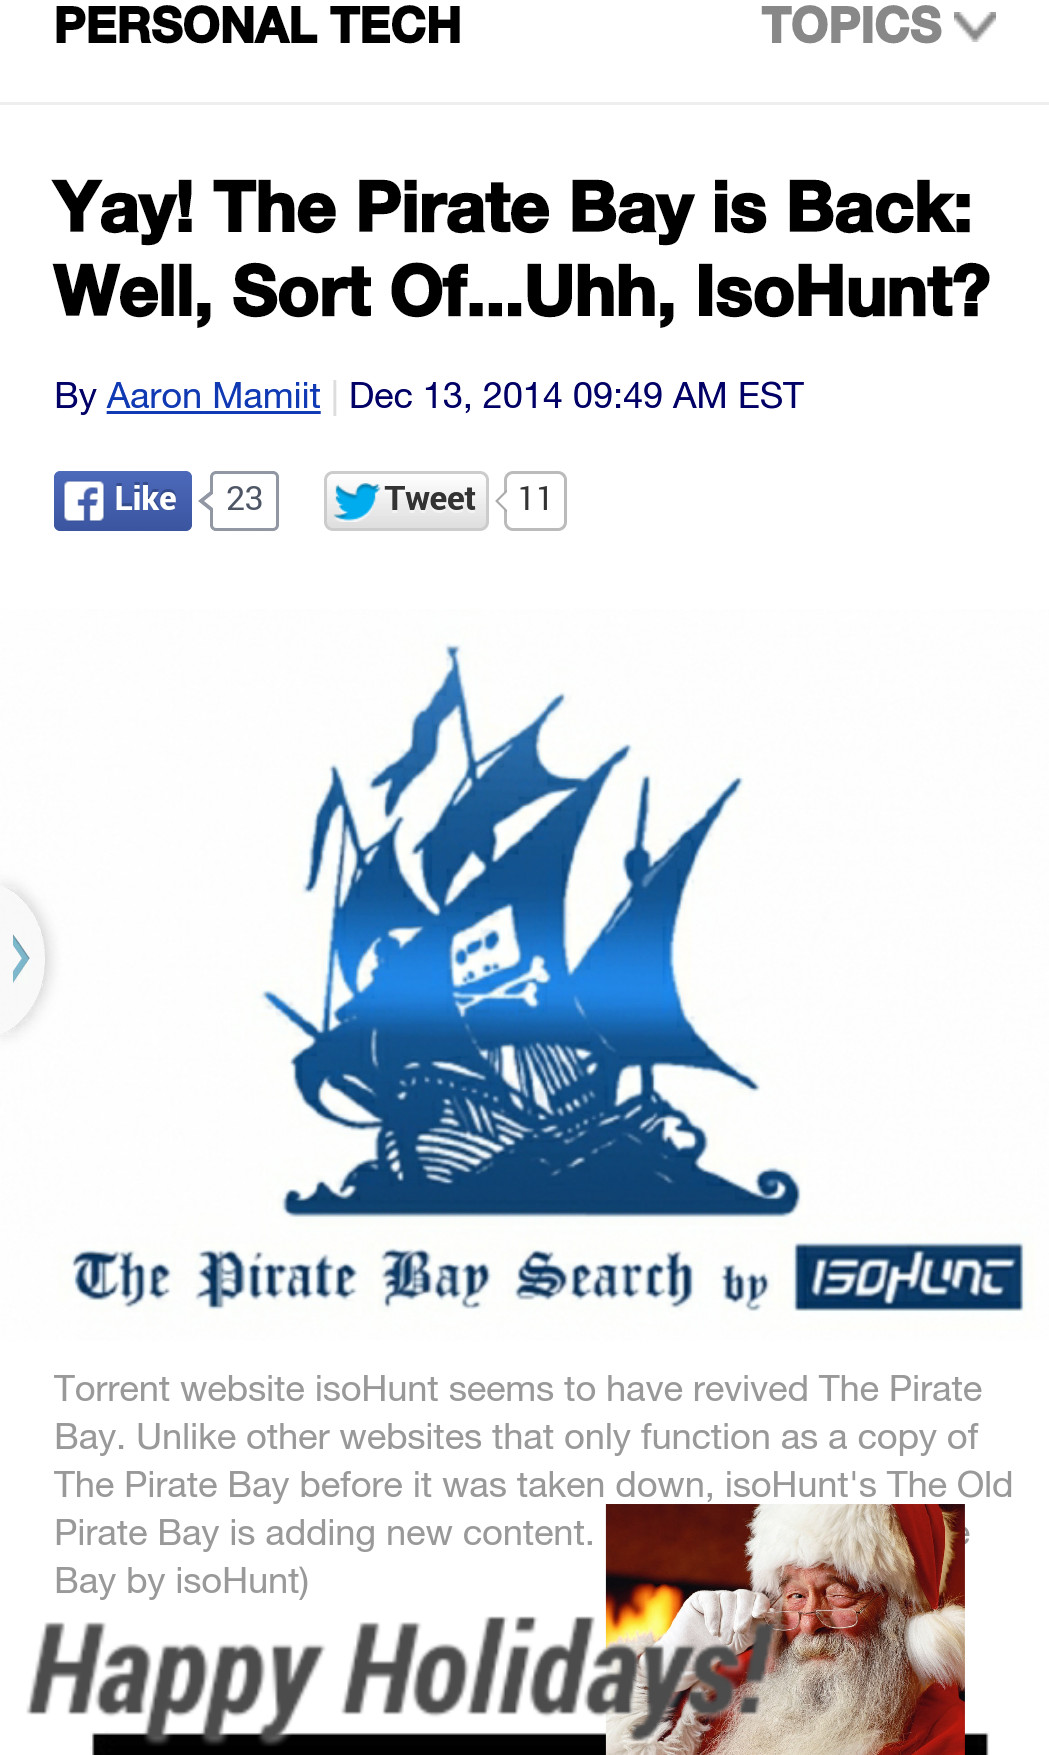 Pirate Bay is back just in time for Christmas! - meme